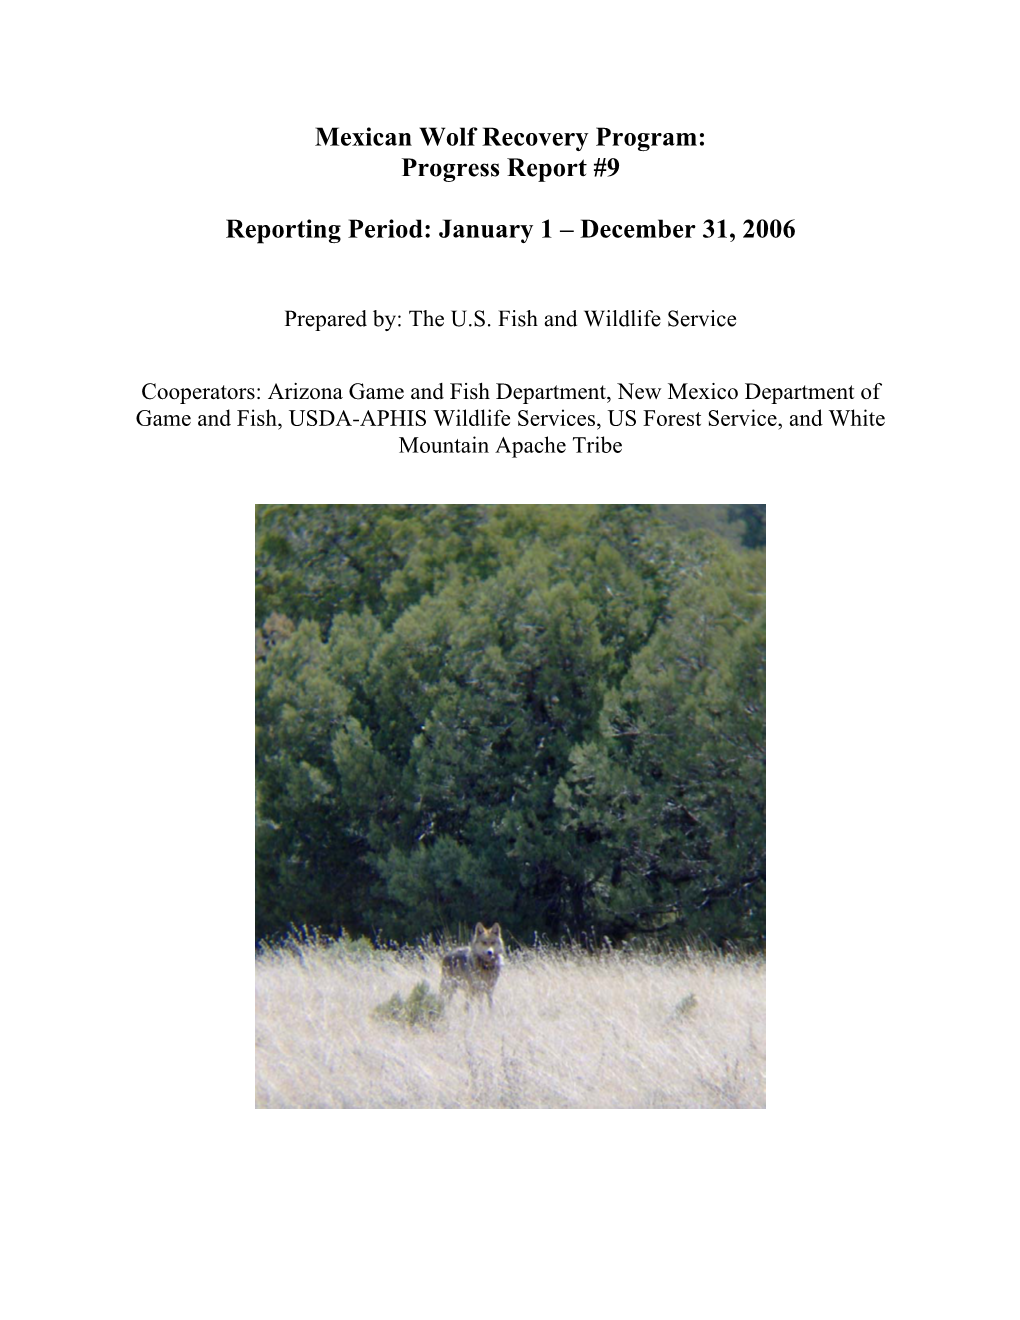 Mexican Wolf Recovery Program: Progress Report #9 Reporting Period